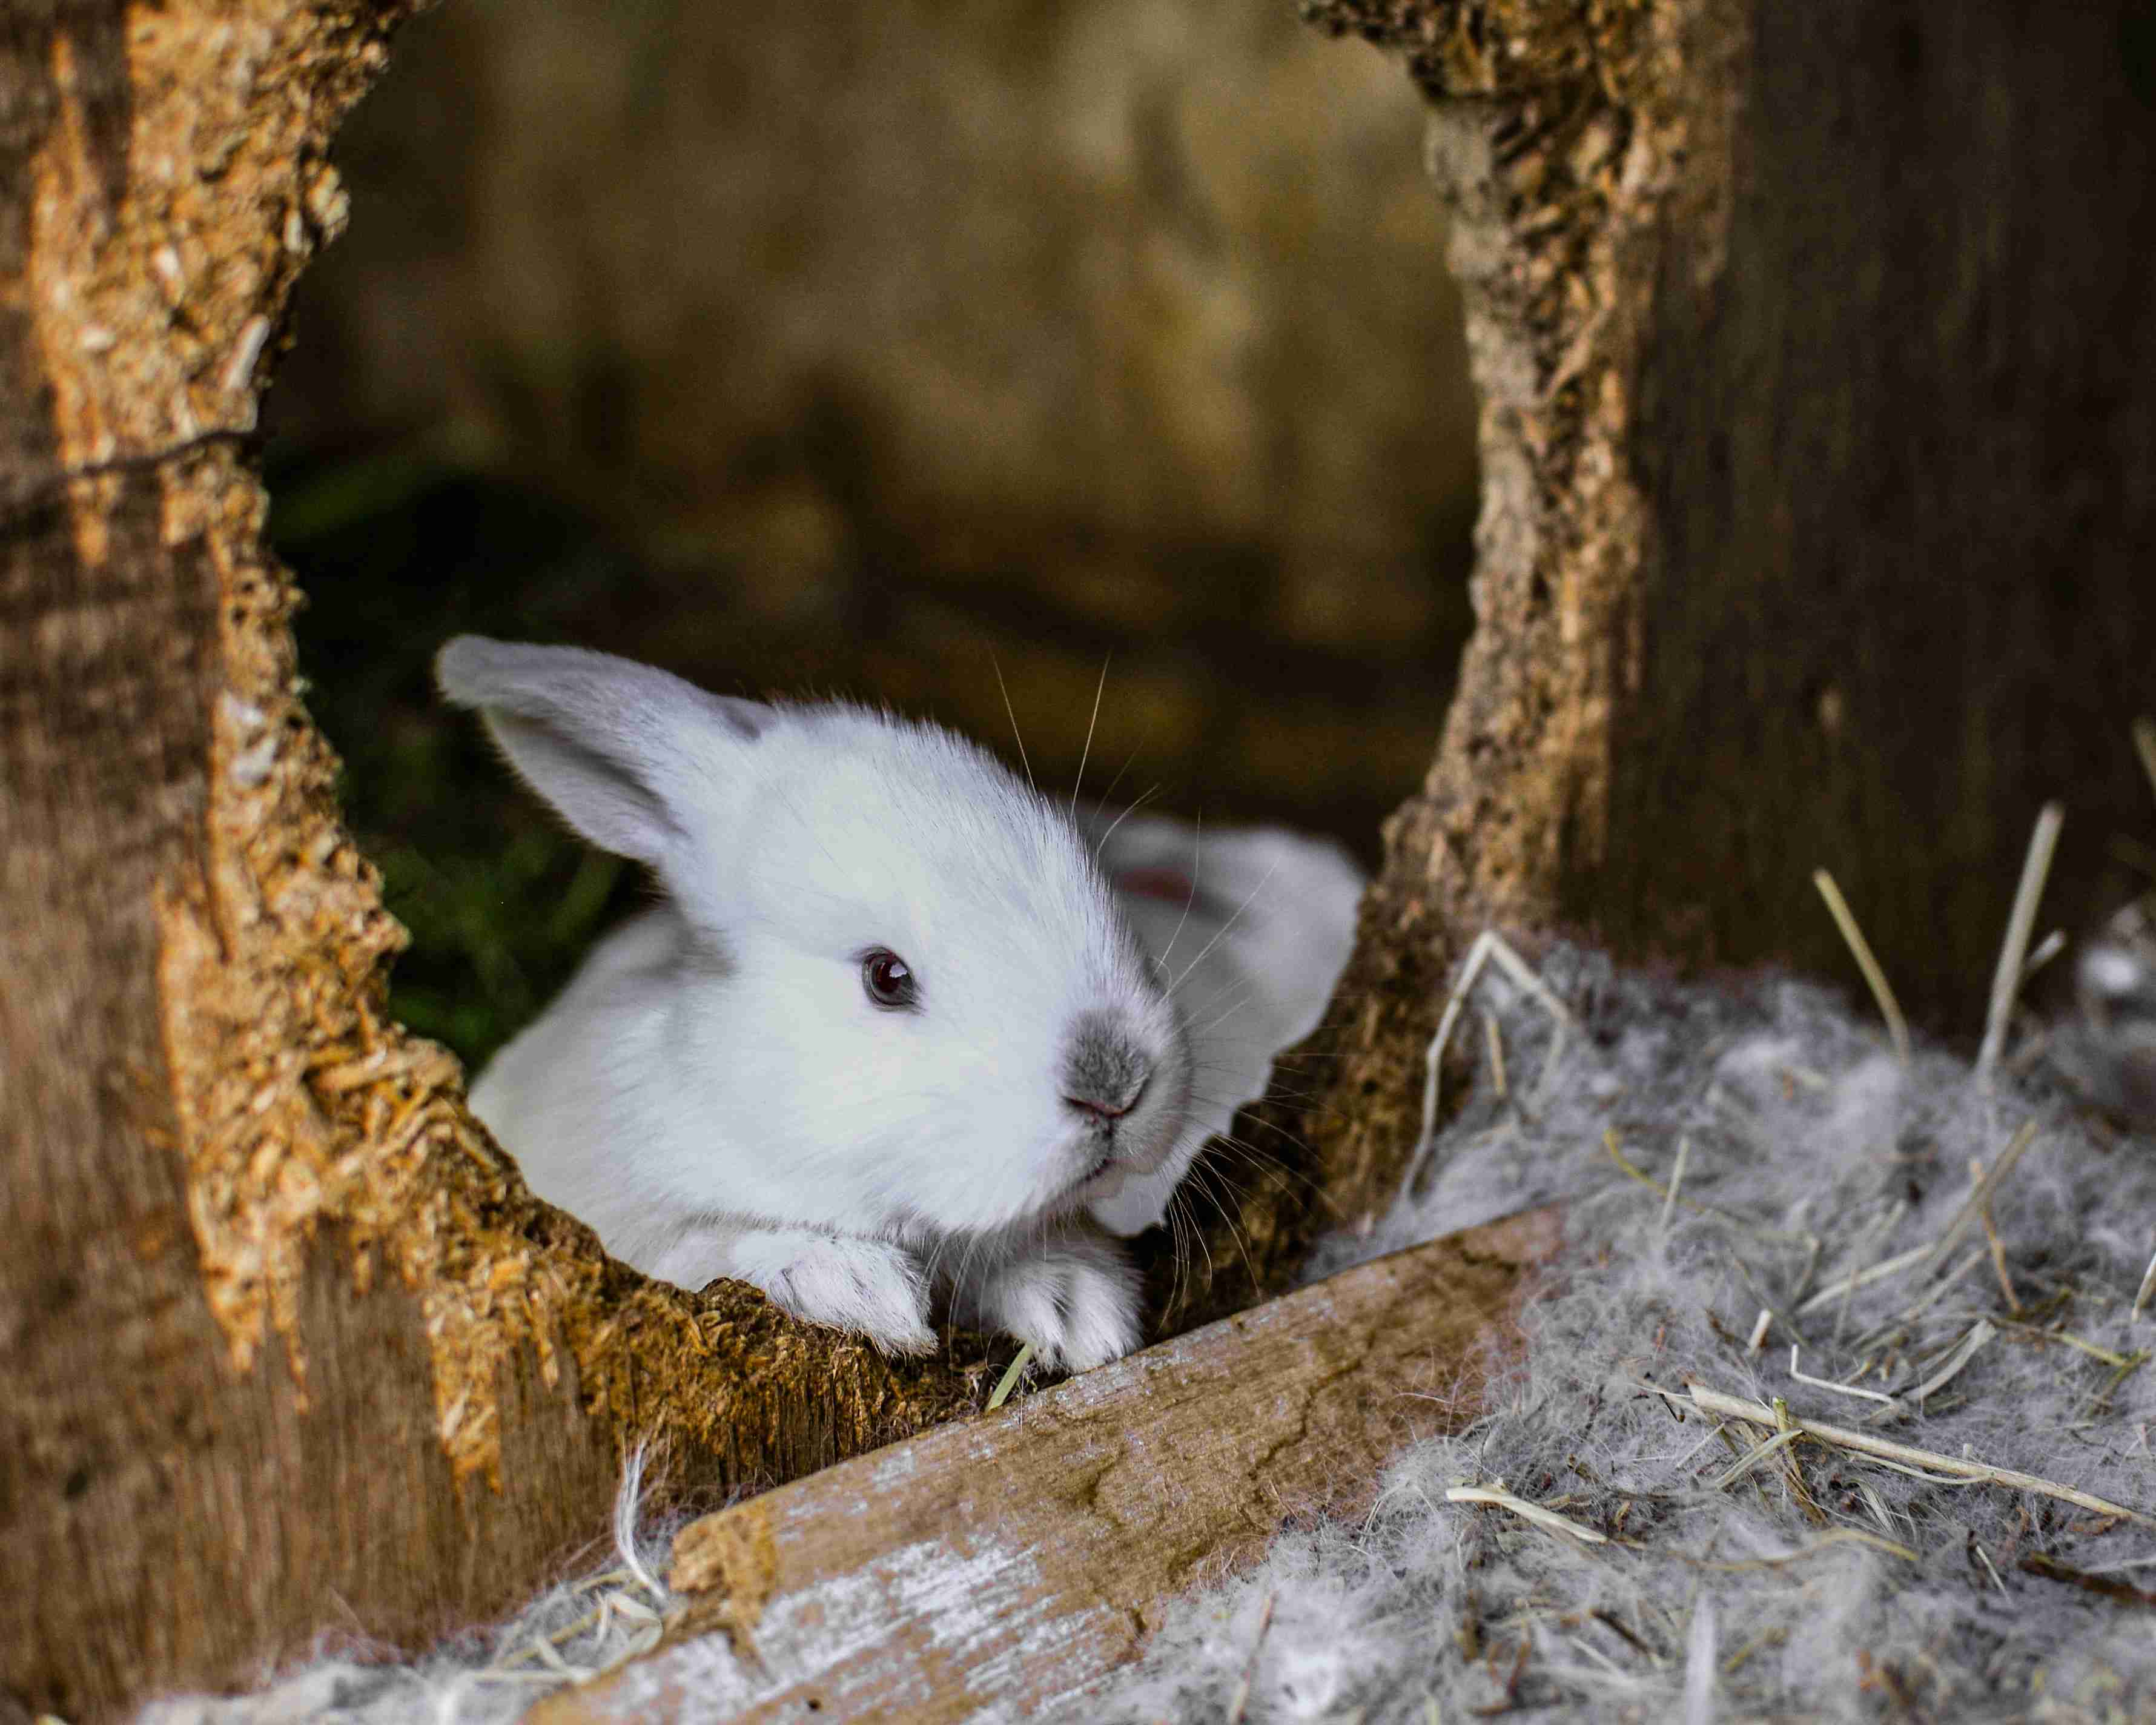 Top Tips for Safely Transporting Your Rabbit to the Vet or on a Trip